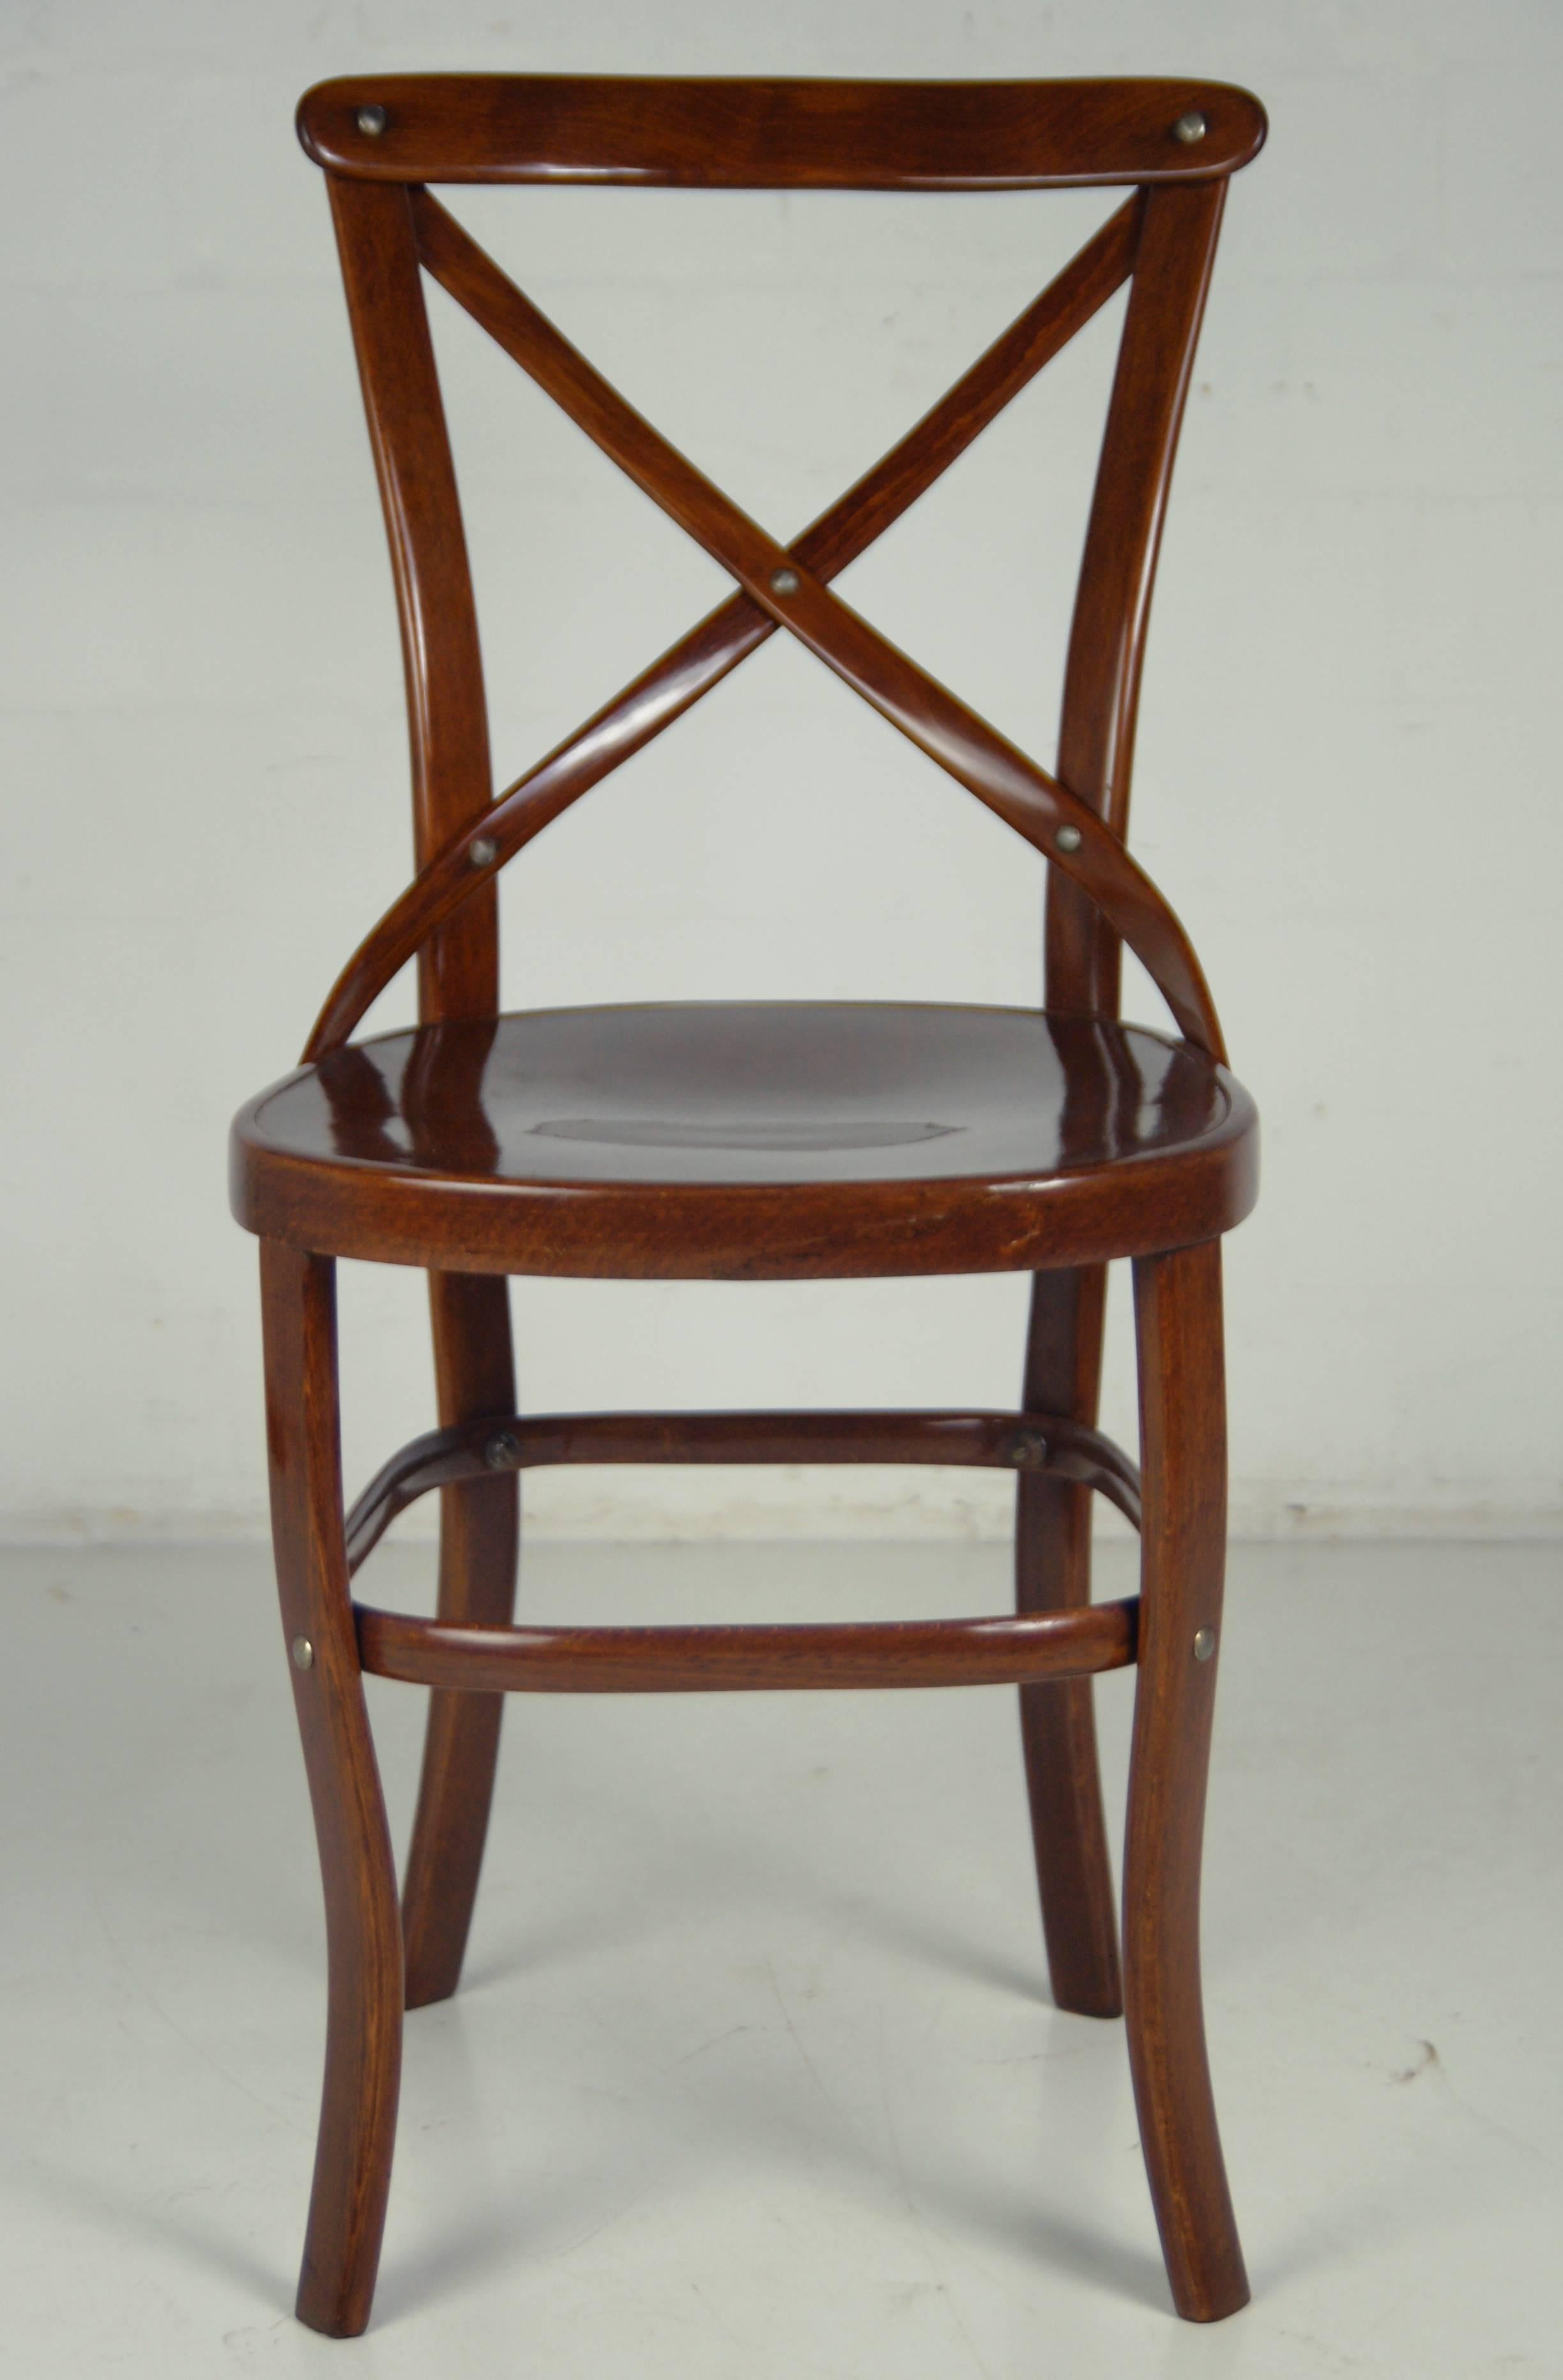 A slatted chair by Thonet manufactured with a solid beech wood and veneer. The piece has been professionally restored and shellac-polished. Beech wood was used as a solid base with another beech wood veneer on top. This wood shines through an